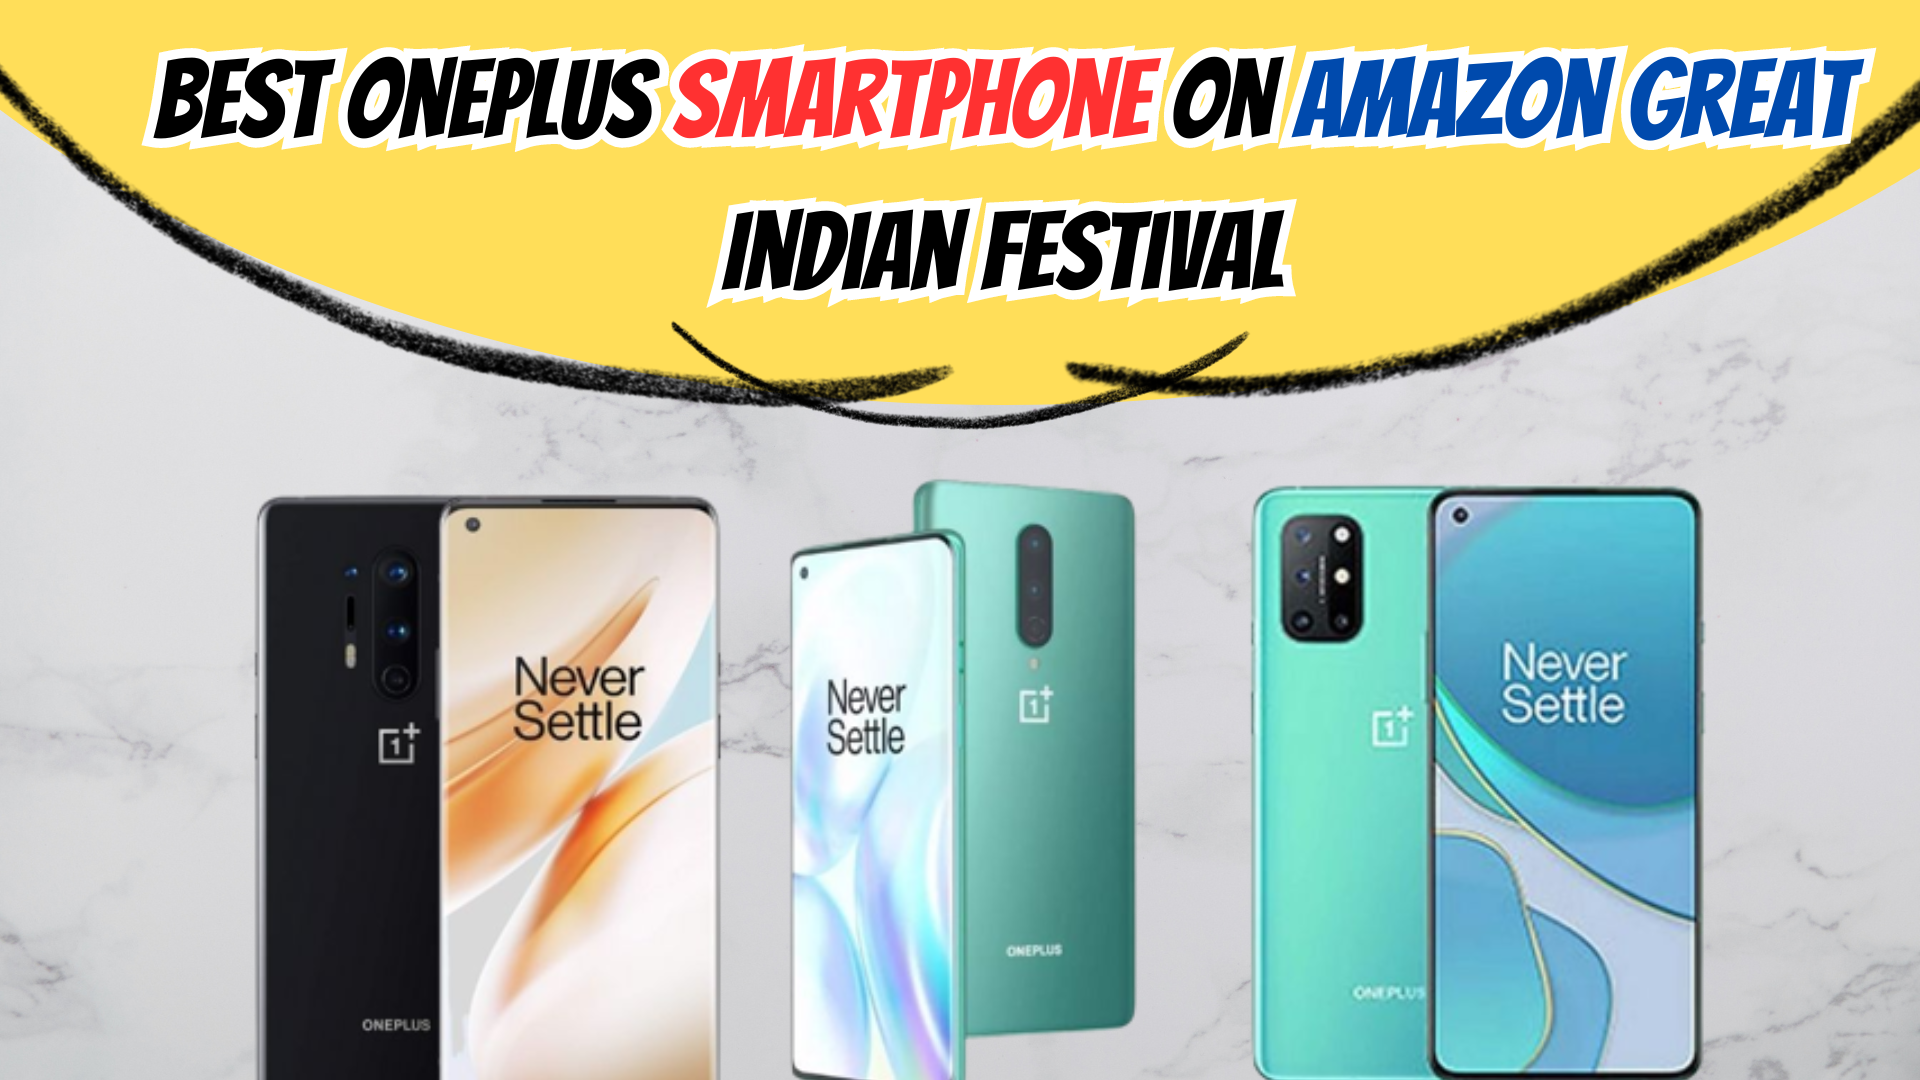 Best OnePlus Smartphone on Amazon Great Indian Festival